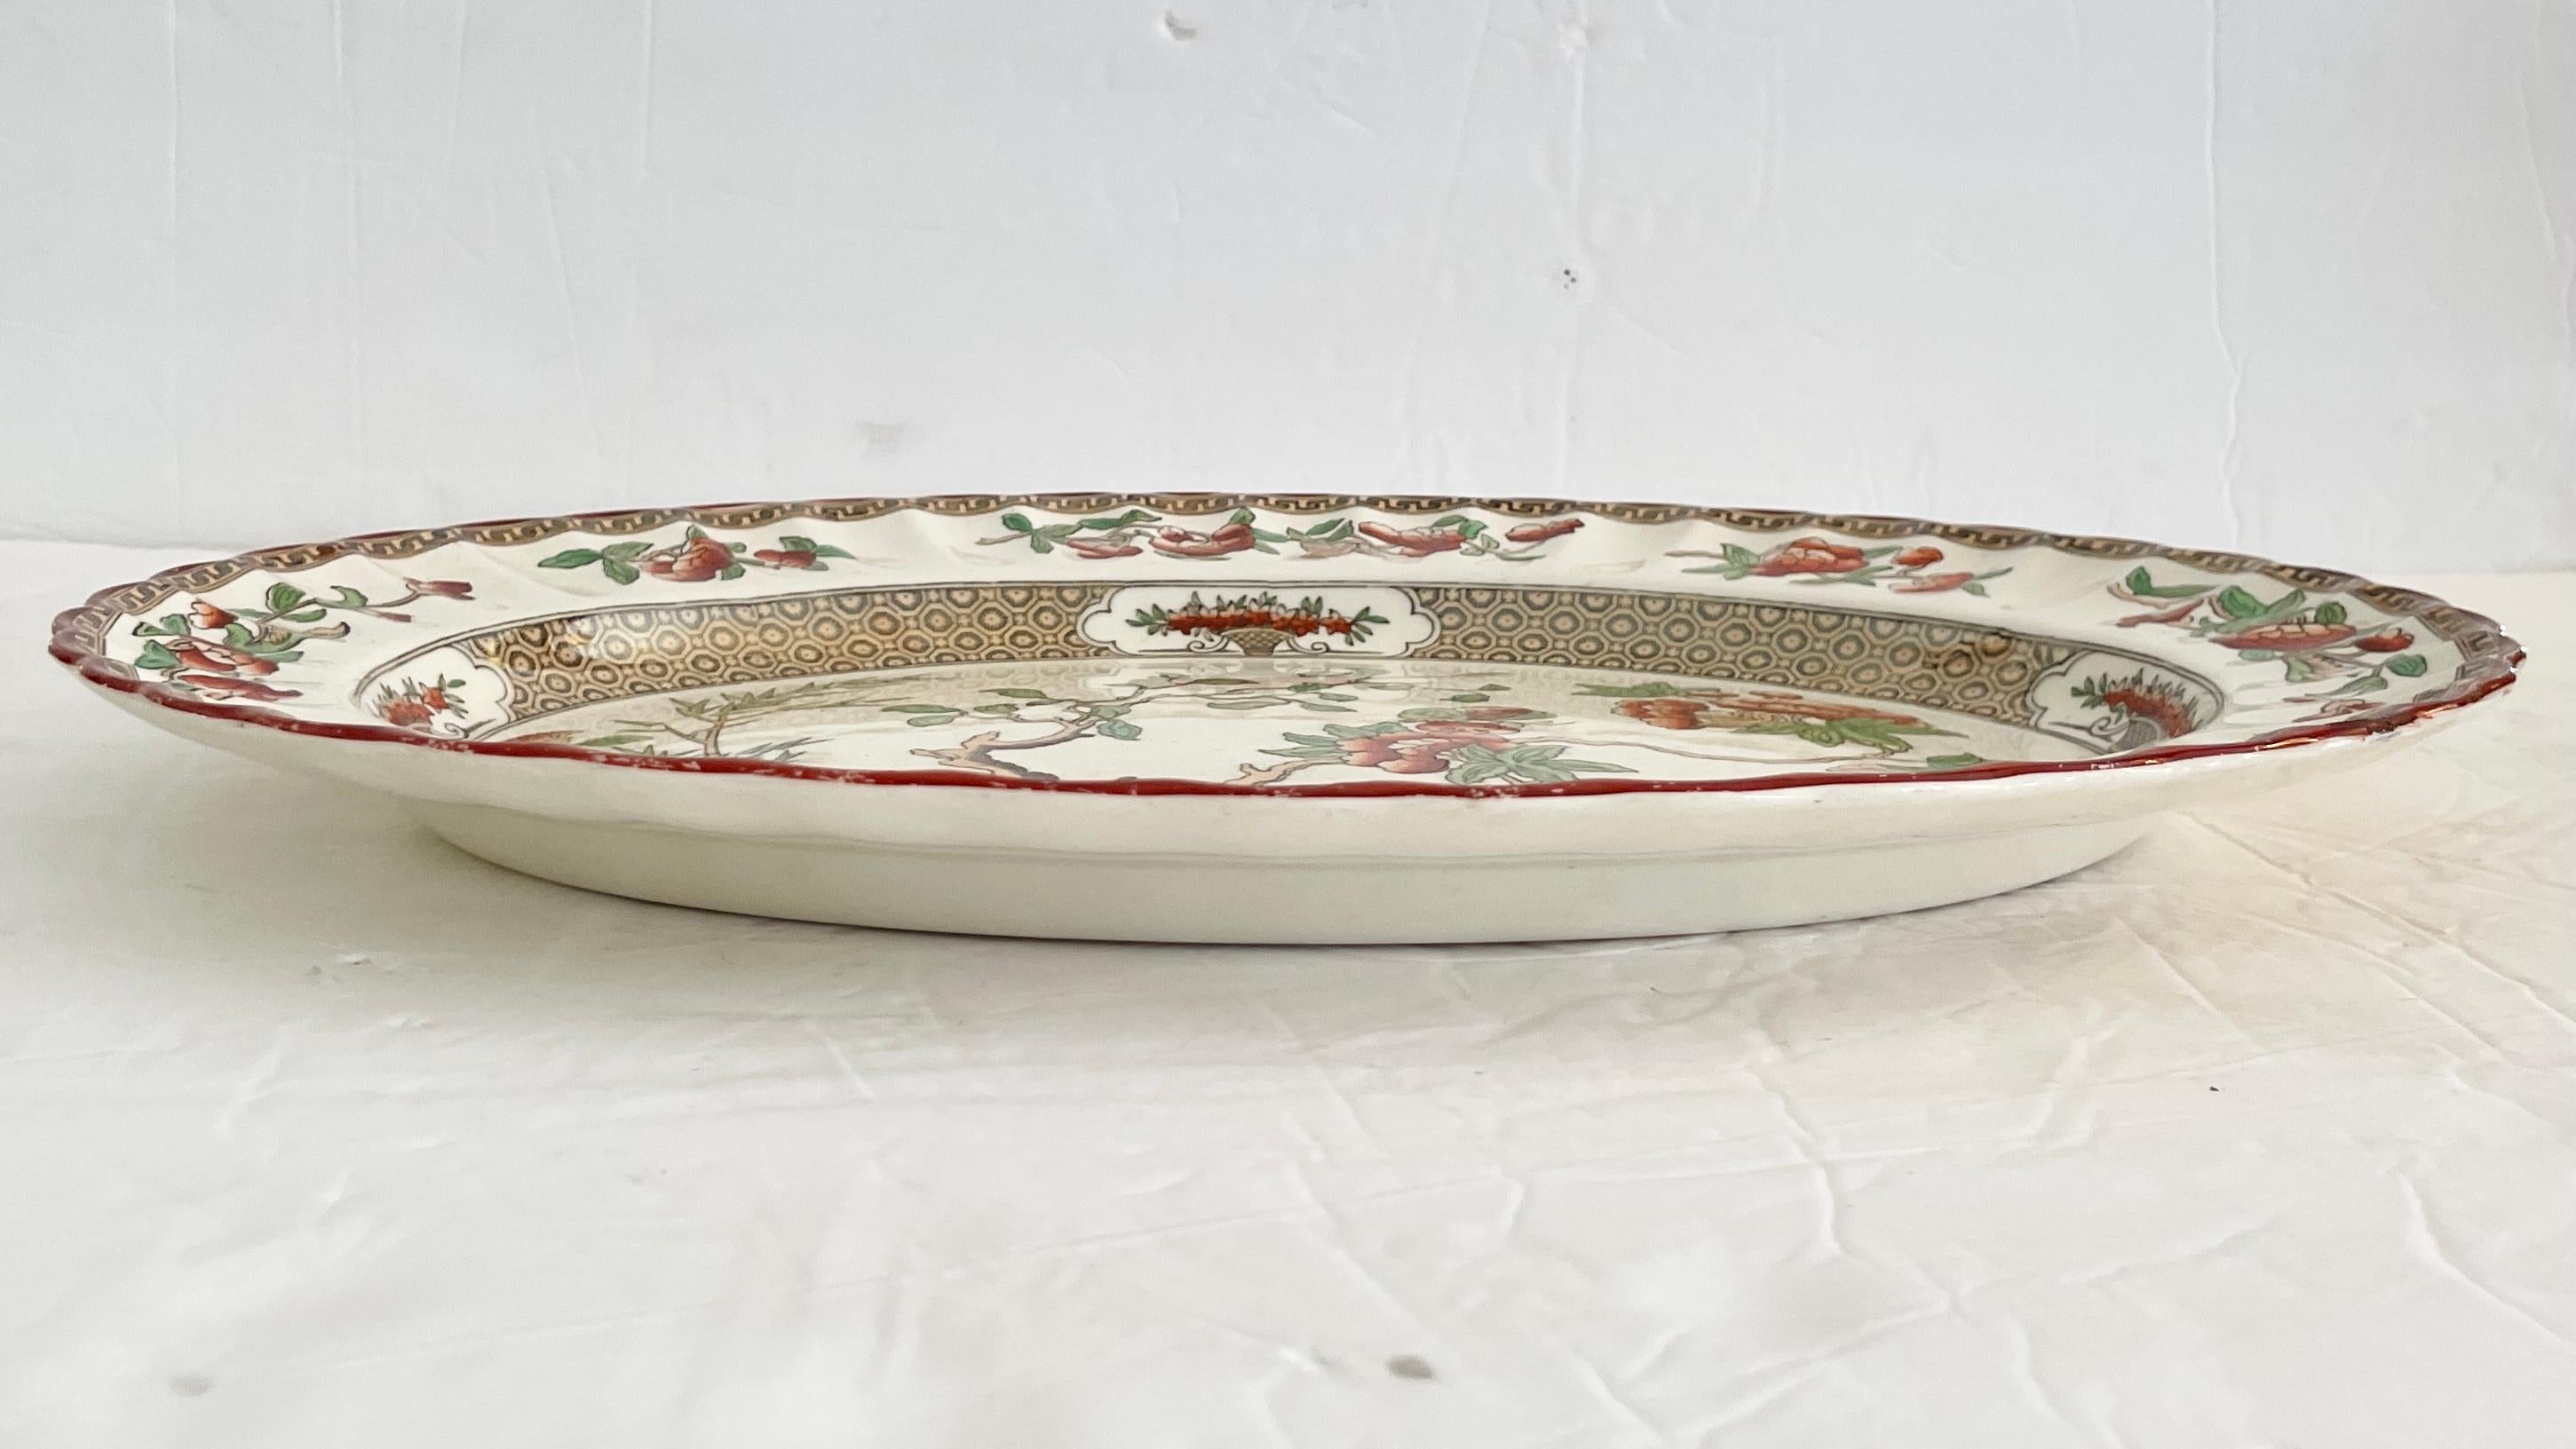 Fabulous oval porcelain serving platter from the English makers Copeland Spode. Beautiful design and colors. See our collection of Copeland Spode and other fine serveware in our listings.